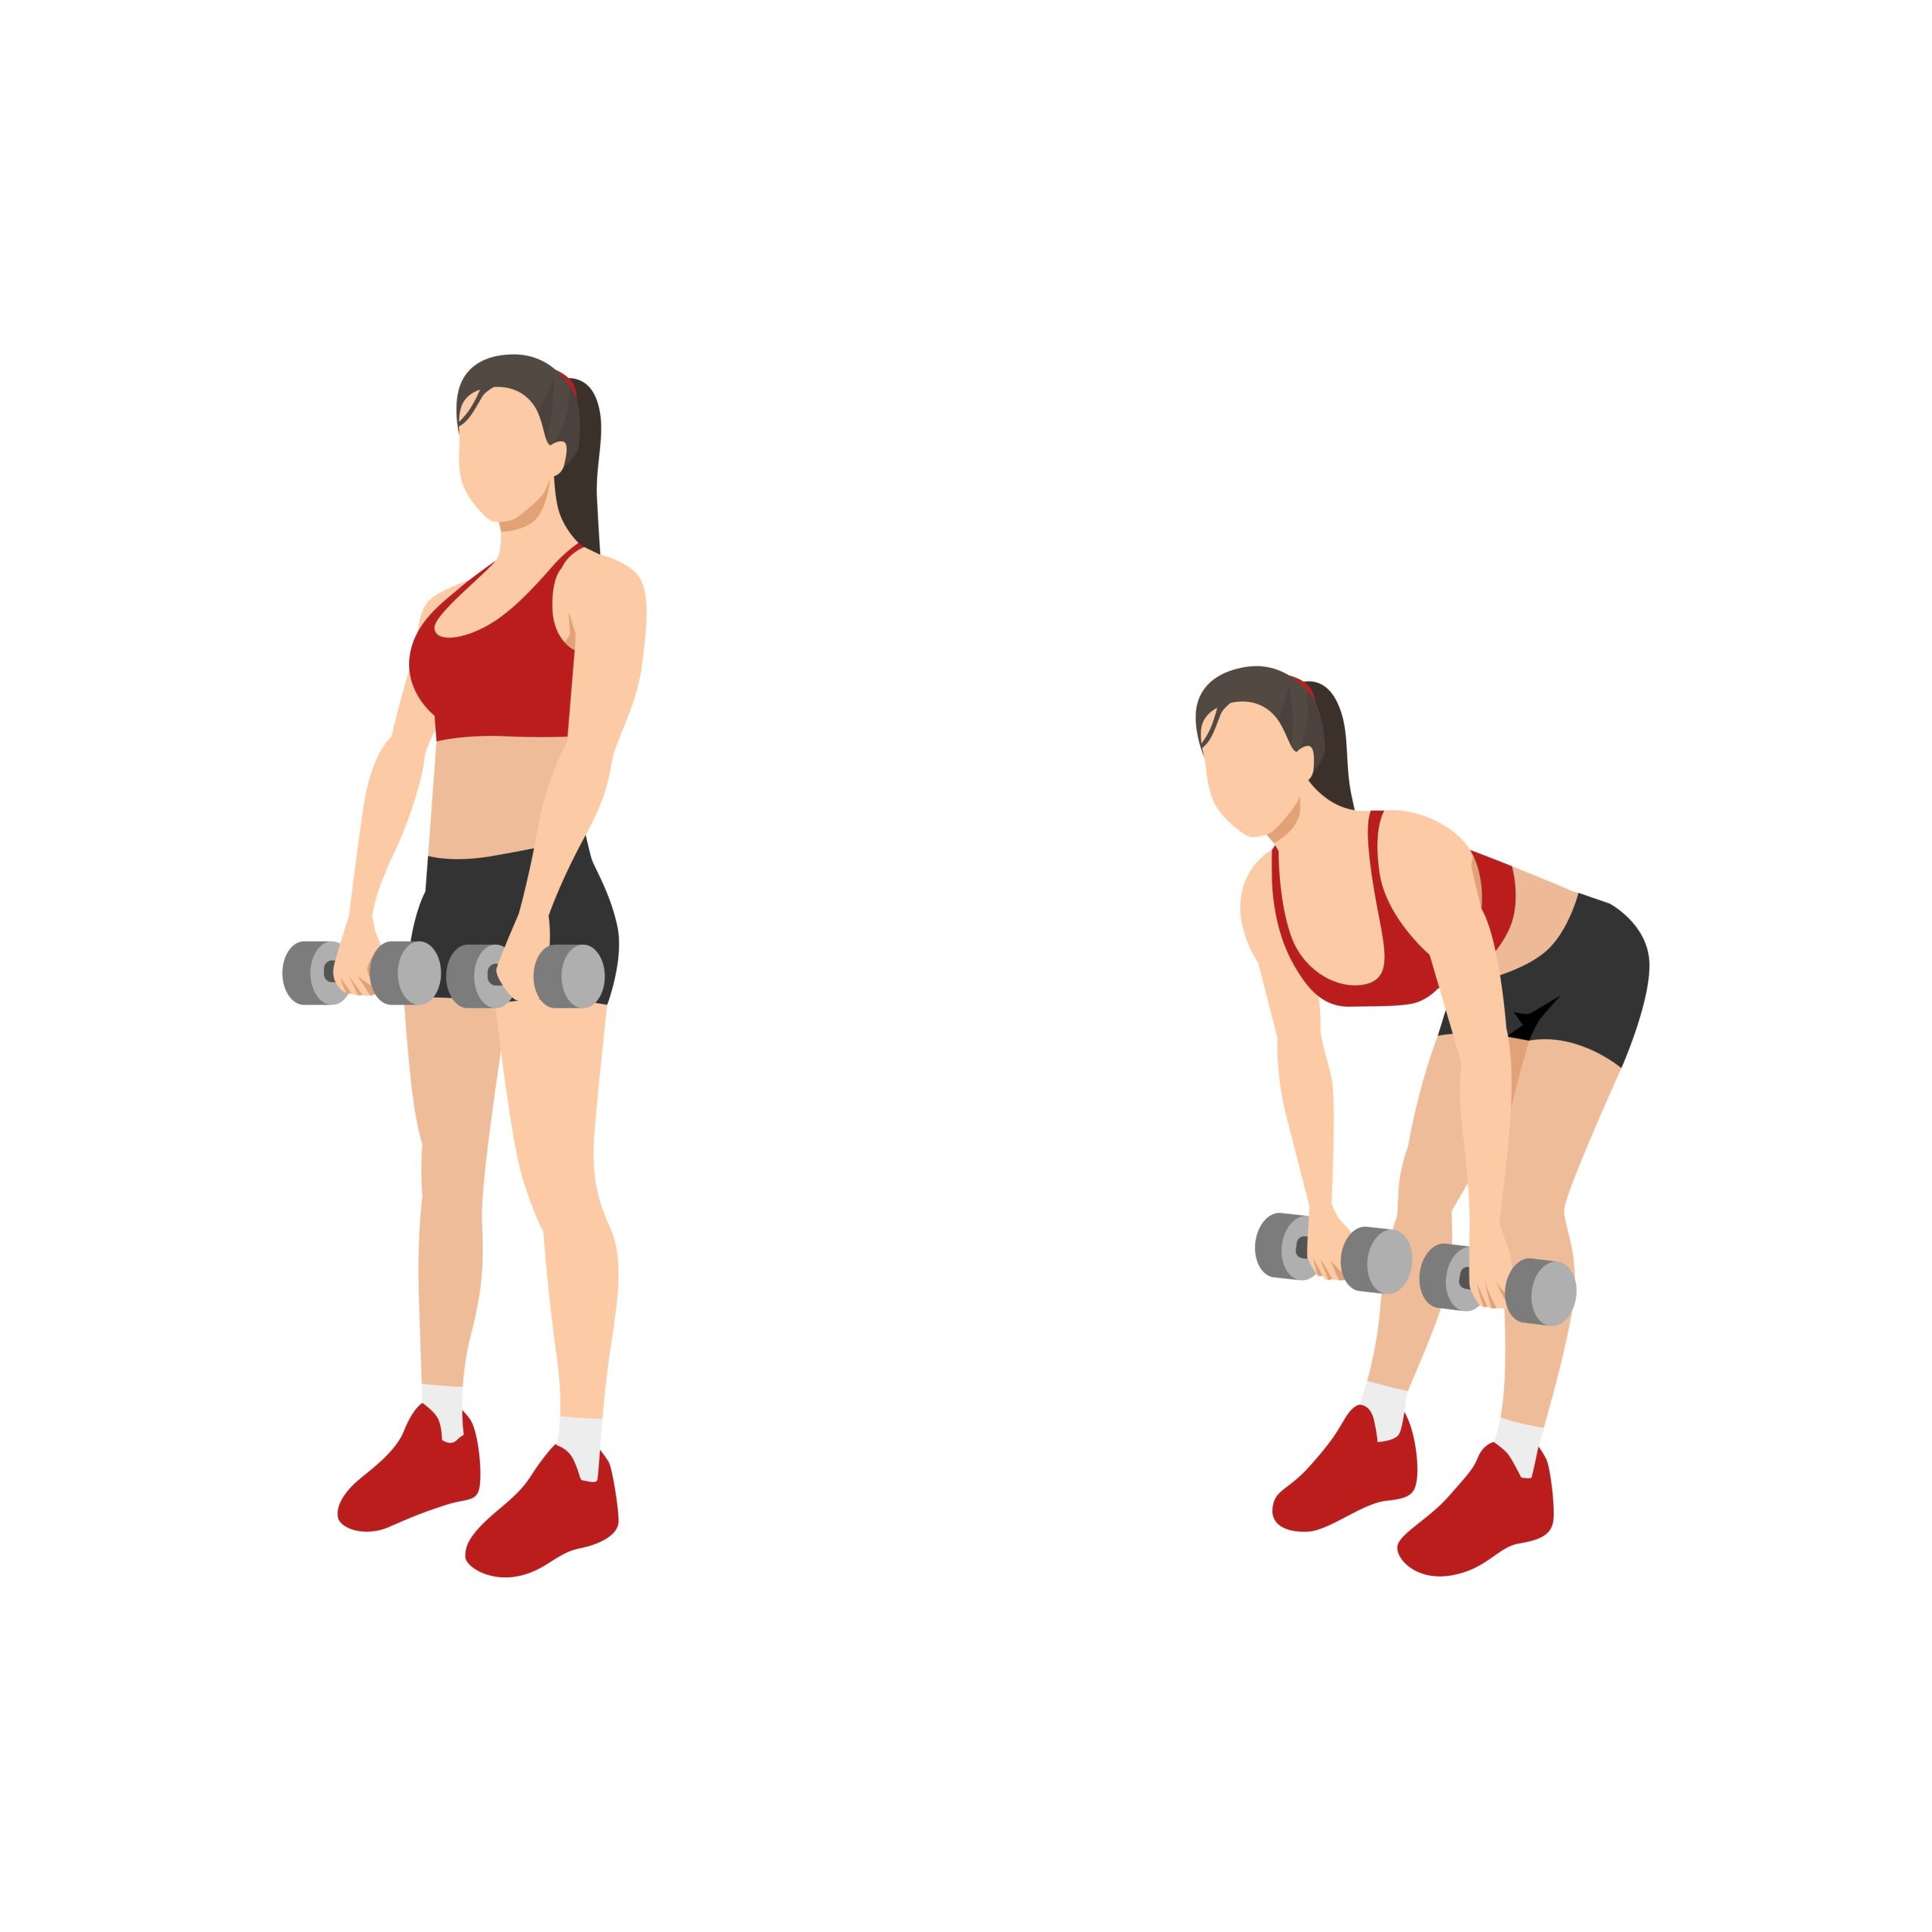 Top 10 Dumbbell Exercises for a Full-Body Workout